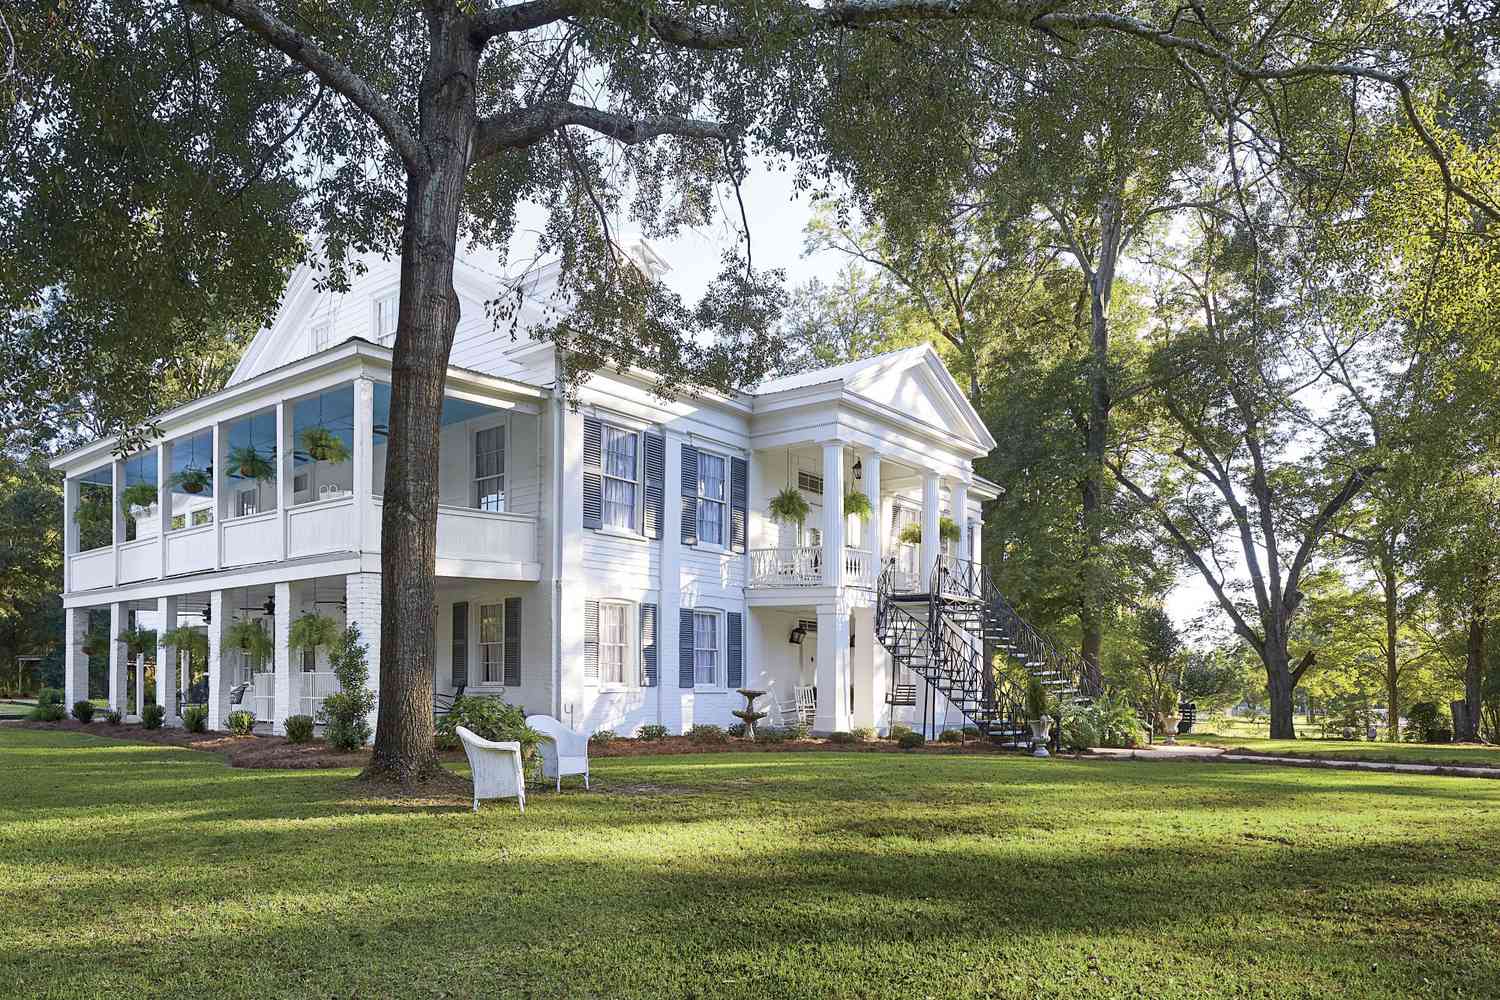 Sidney Collins Freeman Restored House After